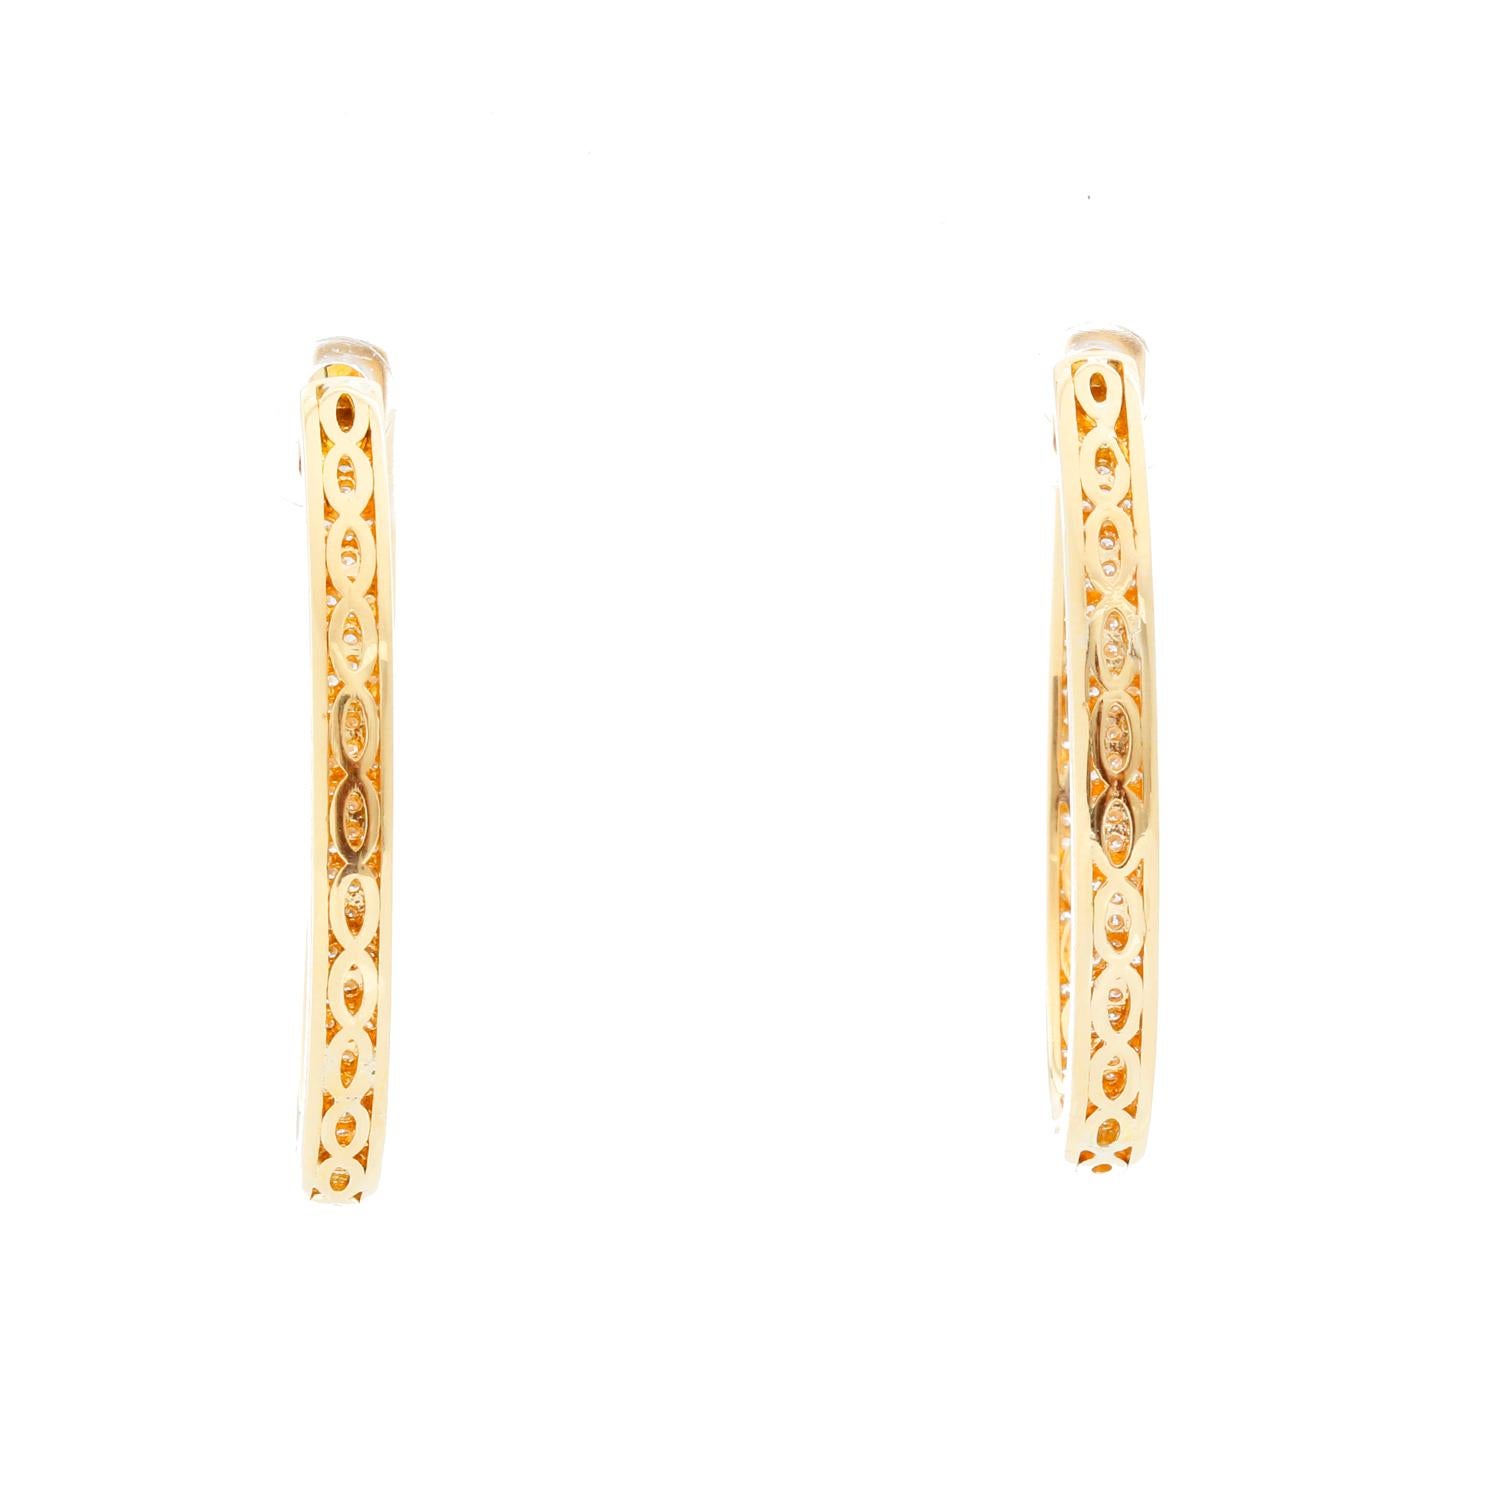 18K Yellow Gold Inside Out Pave Diamond Hoops - 2.80 cts  of Pave diamonds on 18K Yellow Gold. They are the perfect earrings, they are light and do not bring your ear down. Perfect for every day. Measurements: 1.5 long inch by 1 width  inch. Clairty